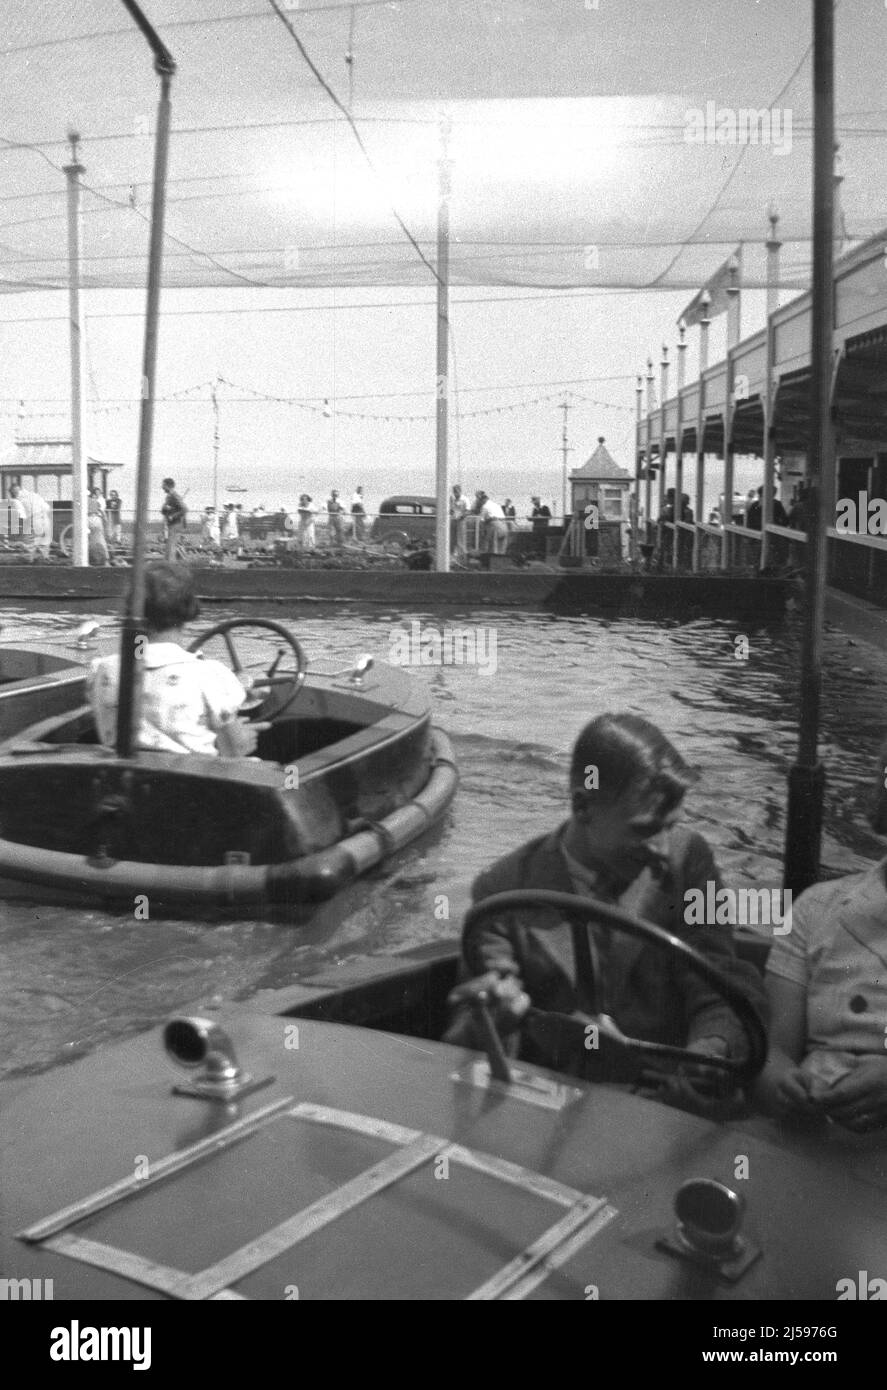 1950s, historical, holiday makers having fun in the small wooden boats on the boating pool at the famous beach Dreamland pleasure park at Margate, Kent, England, UK. Stock Photo